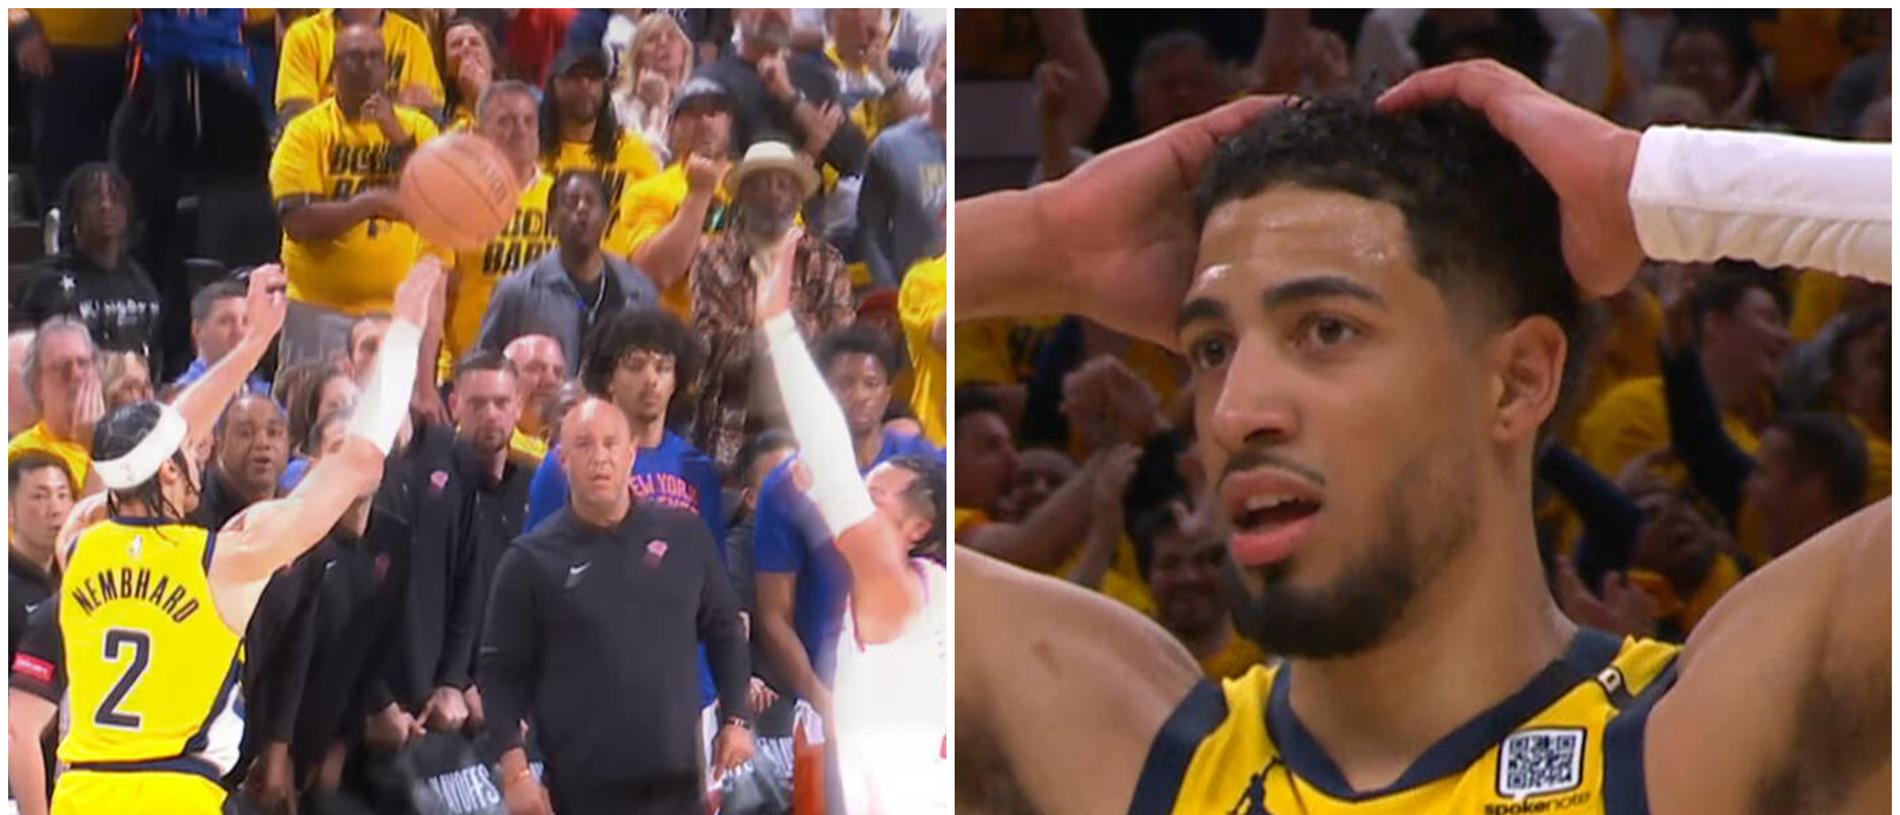 A miracle shot stunned the NBA world - and even his own teammates.